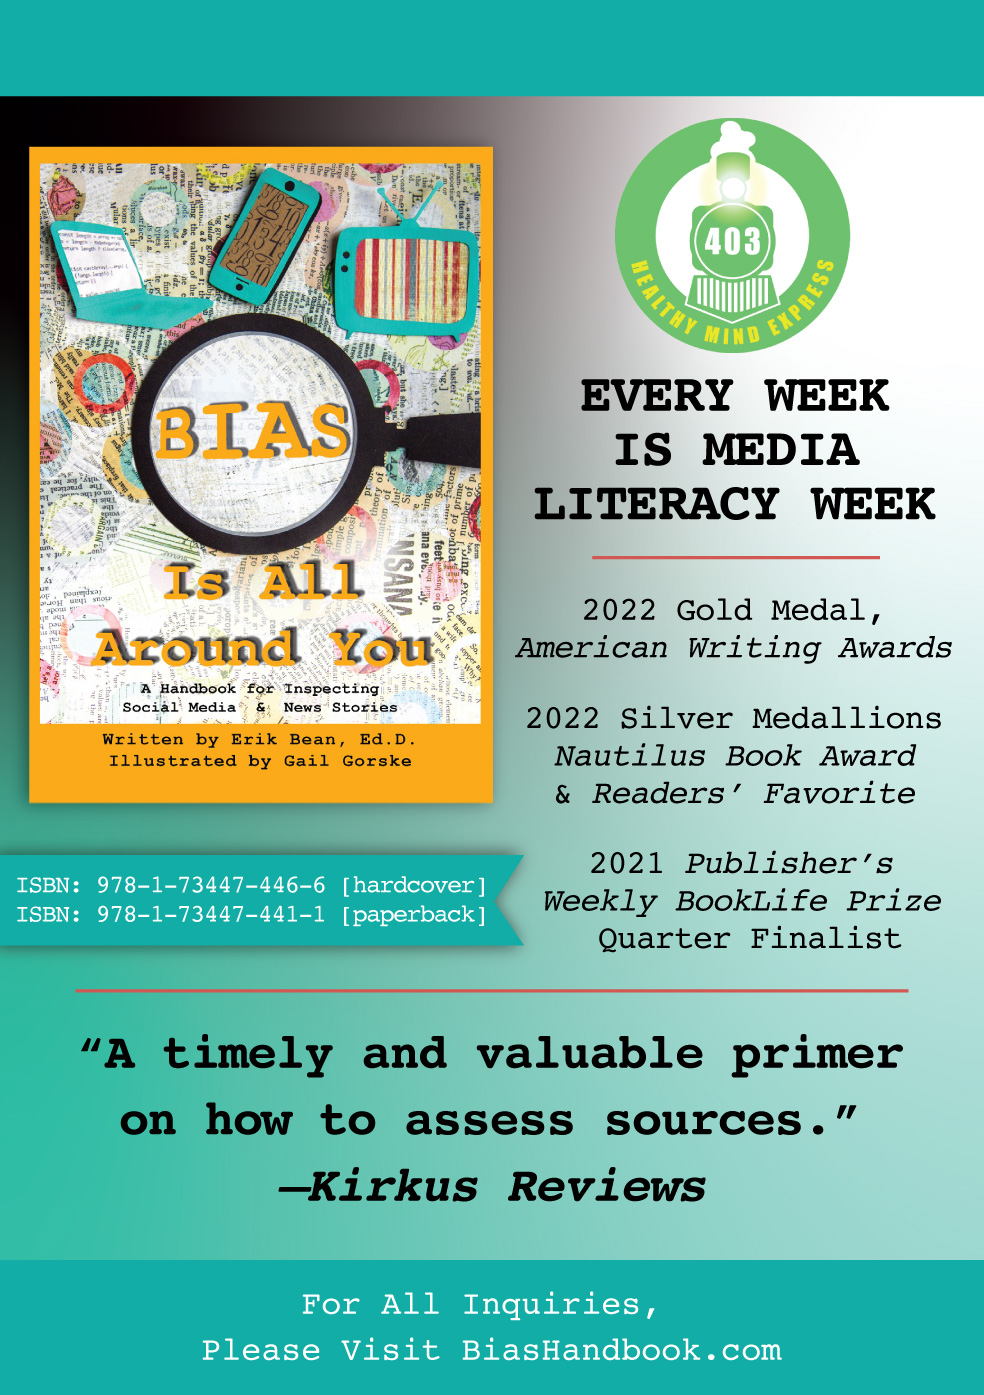 Bias Is All Around You Book Offers a Practical Approach to Advancing Information Literacy Before, During, and After National News Literacy Week: Jan. 23-27, 2023